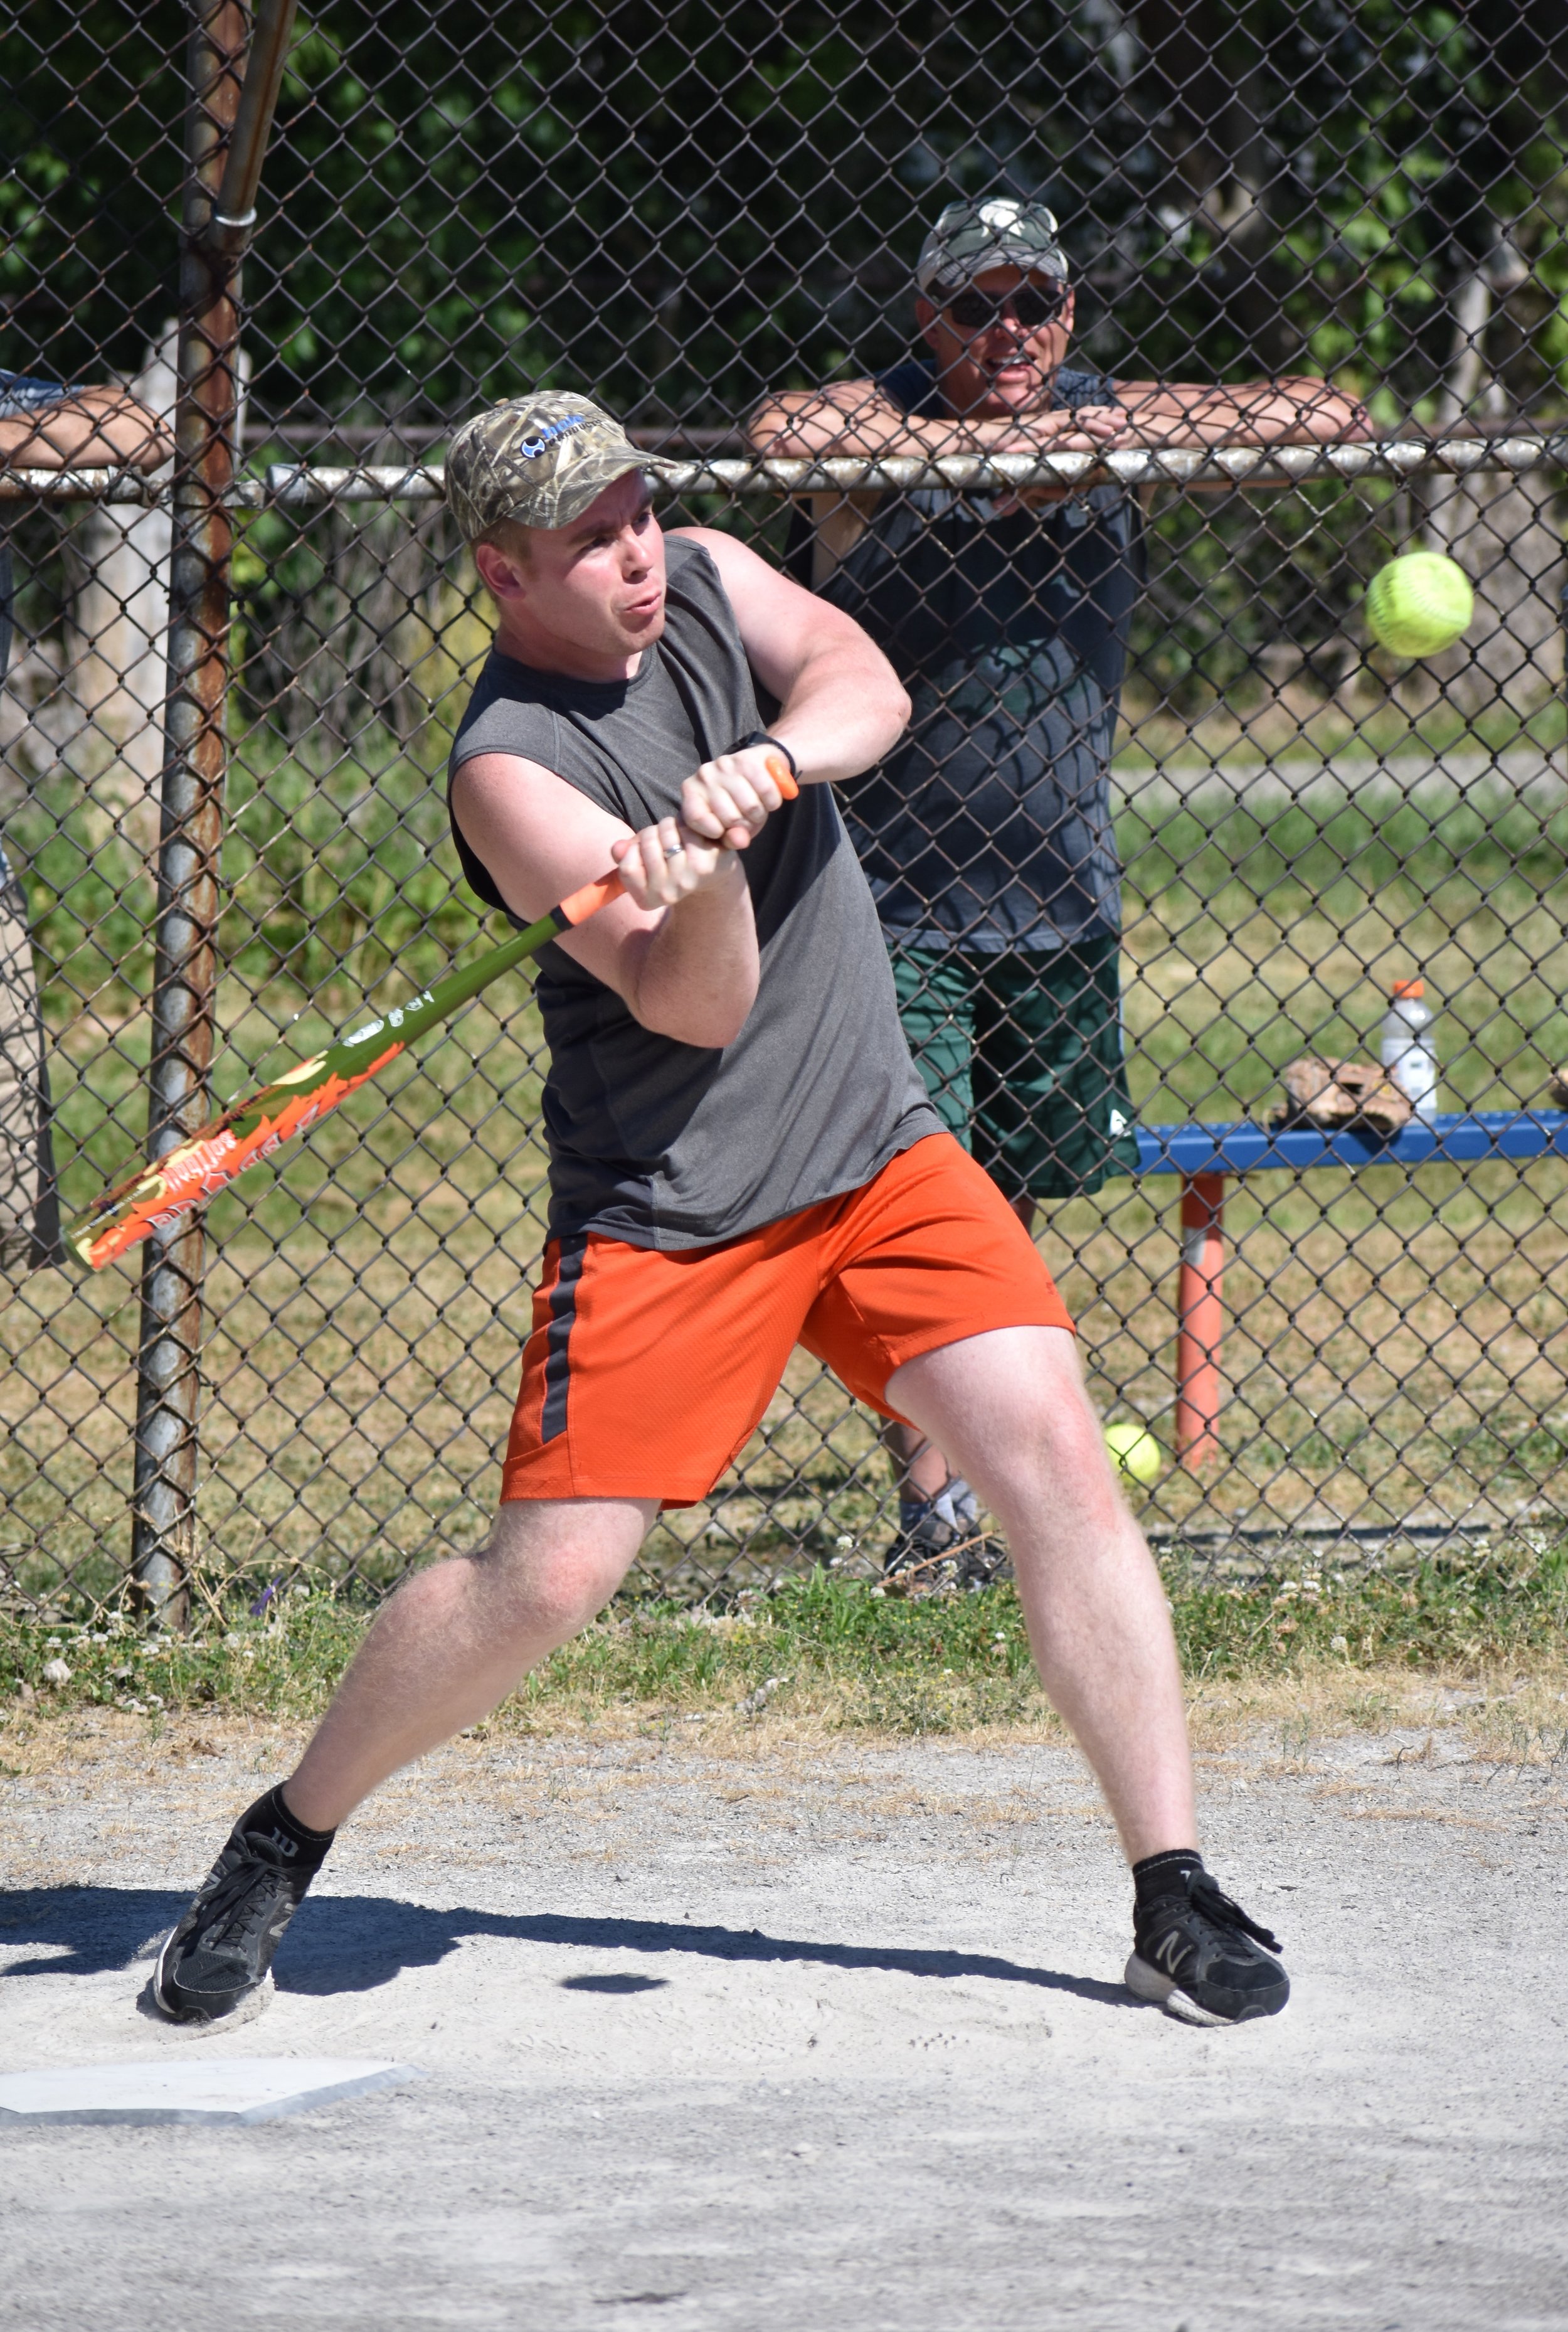  male player swinging at ball 